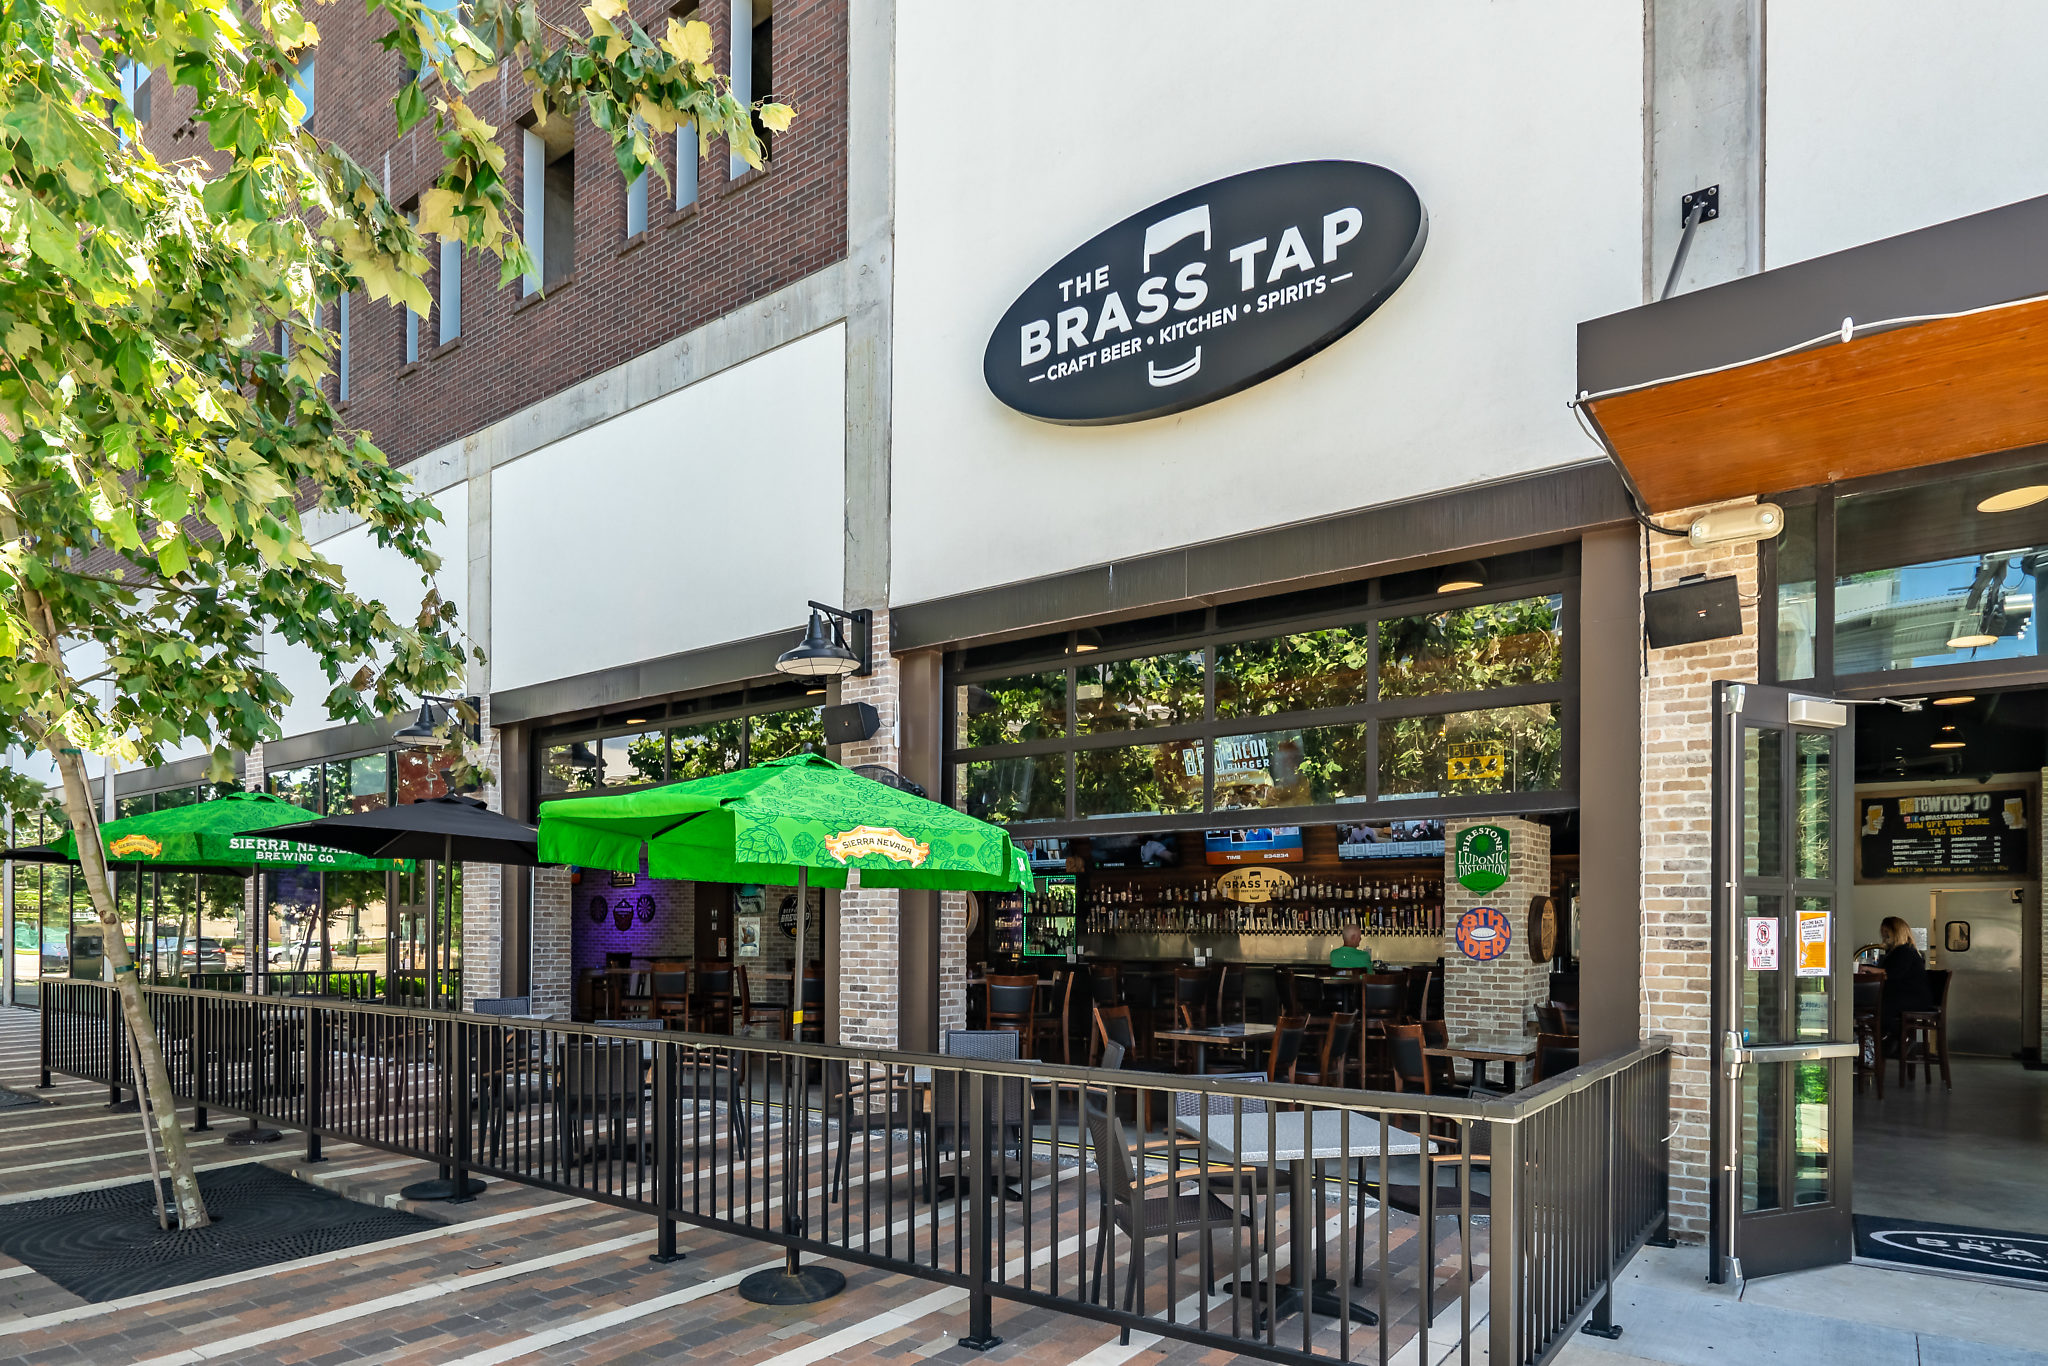 The Brass Tap is a neighborhood bar and restaurant located at Mid Main Lofts